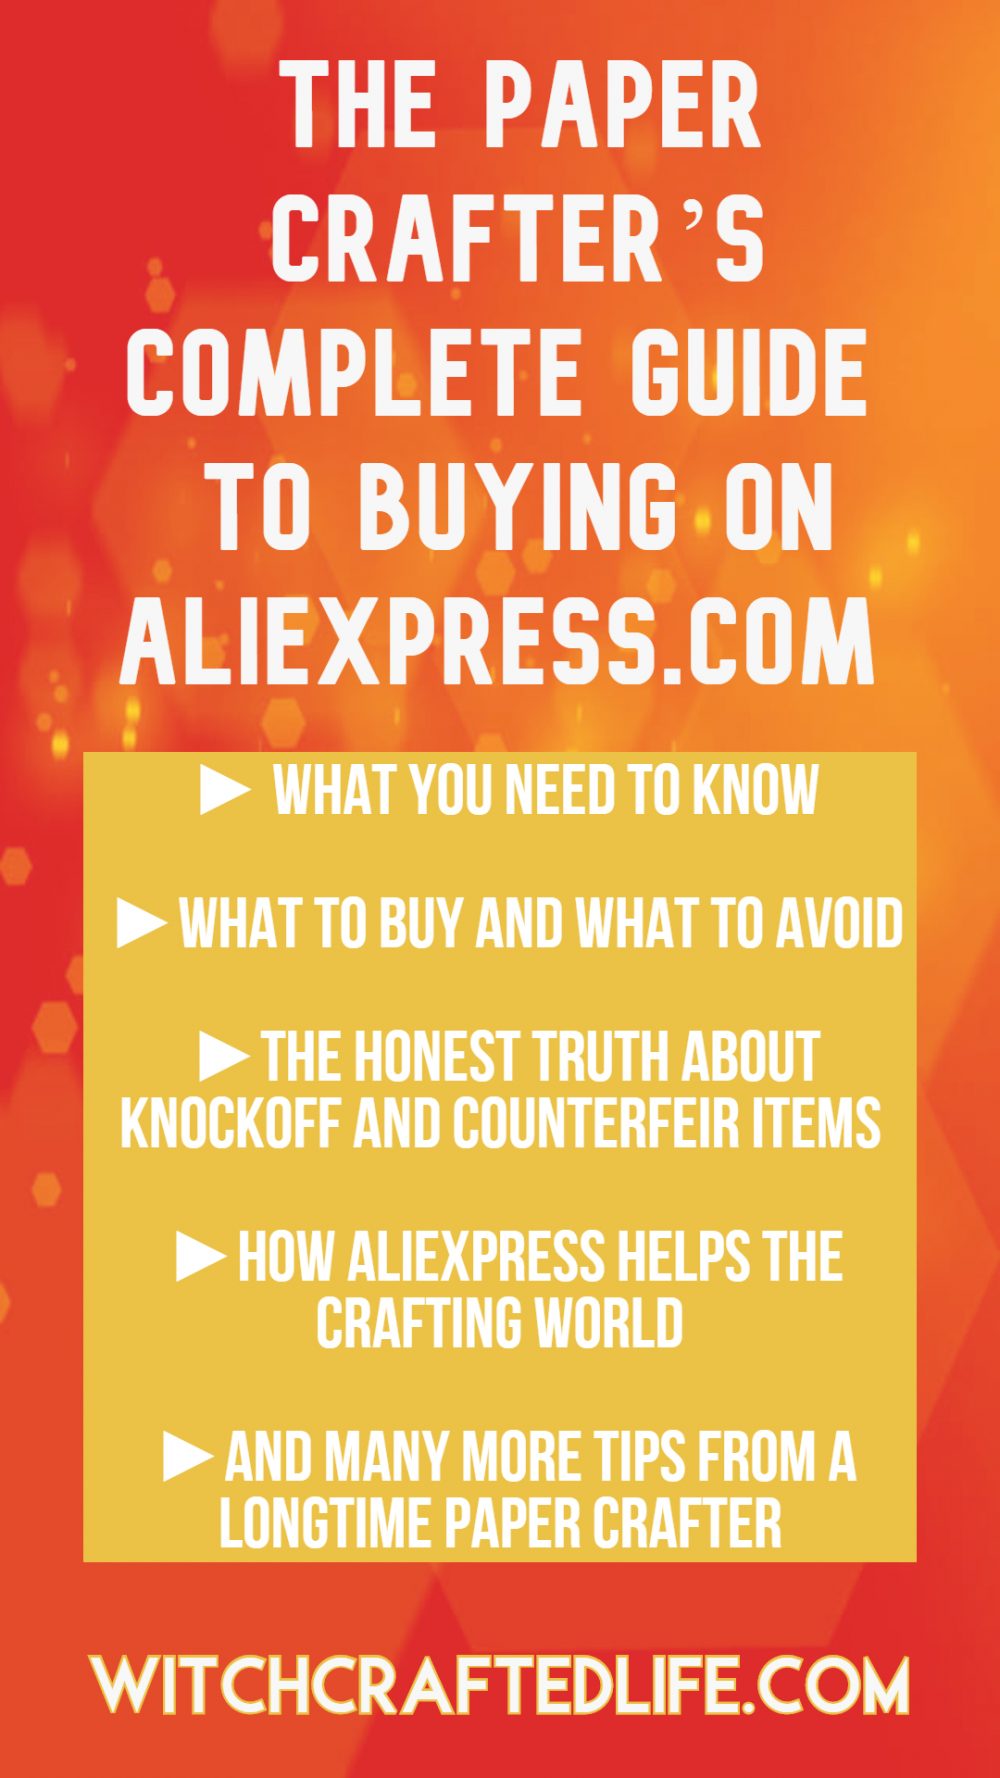 The paper crafter’s complete guide to buying on AliExpress